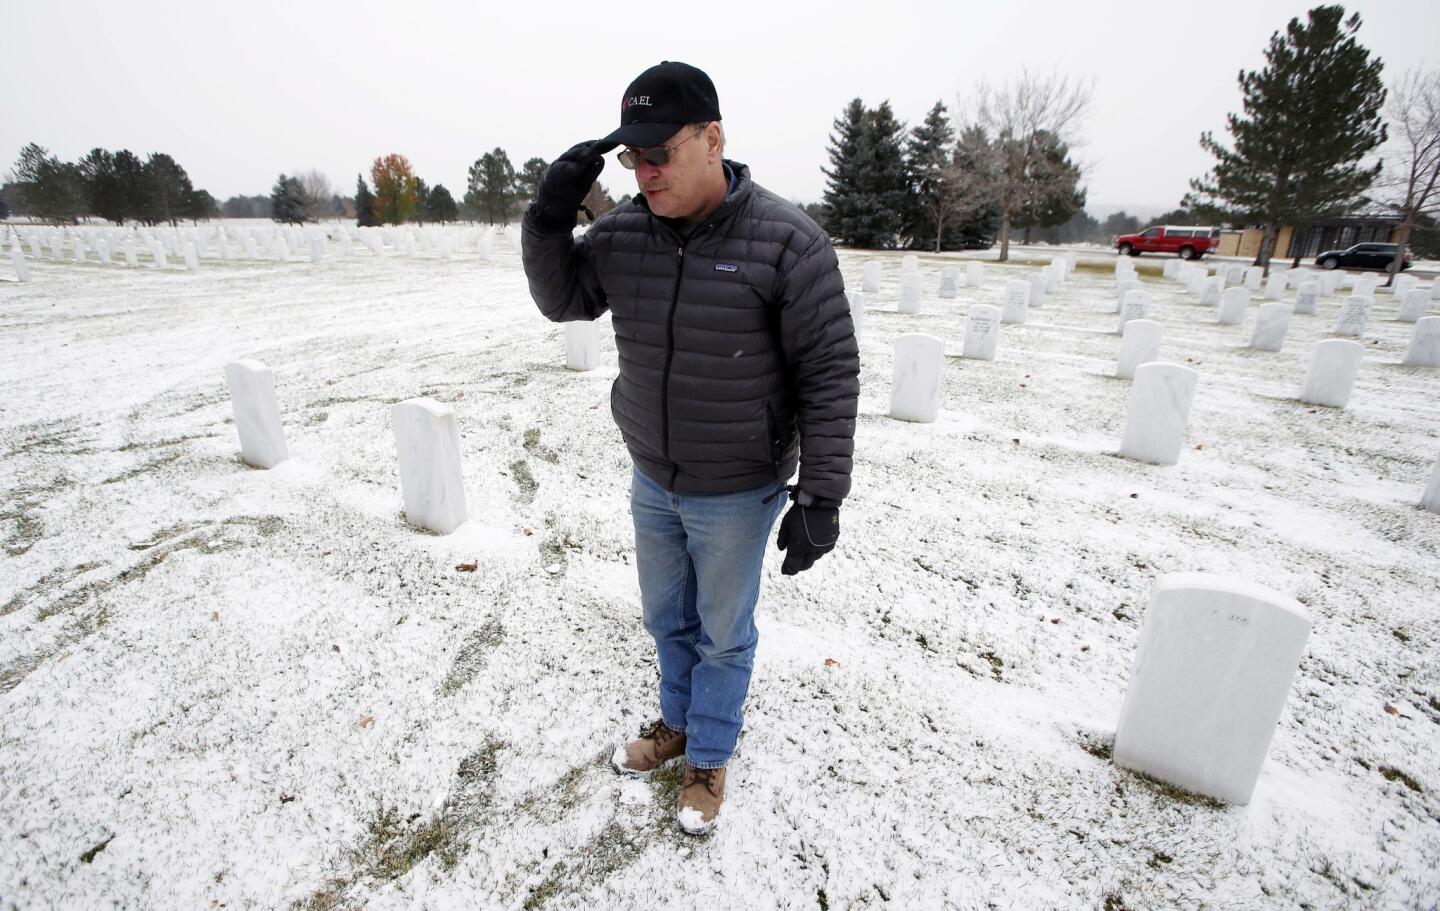 To commemorate Veterans Day, John Smigel salutes at the grave of Army Sgt. Robert W. Raiser, a World War II veteran, at Ft. Logan National Cemetery in Denver.